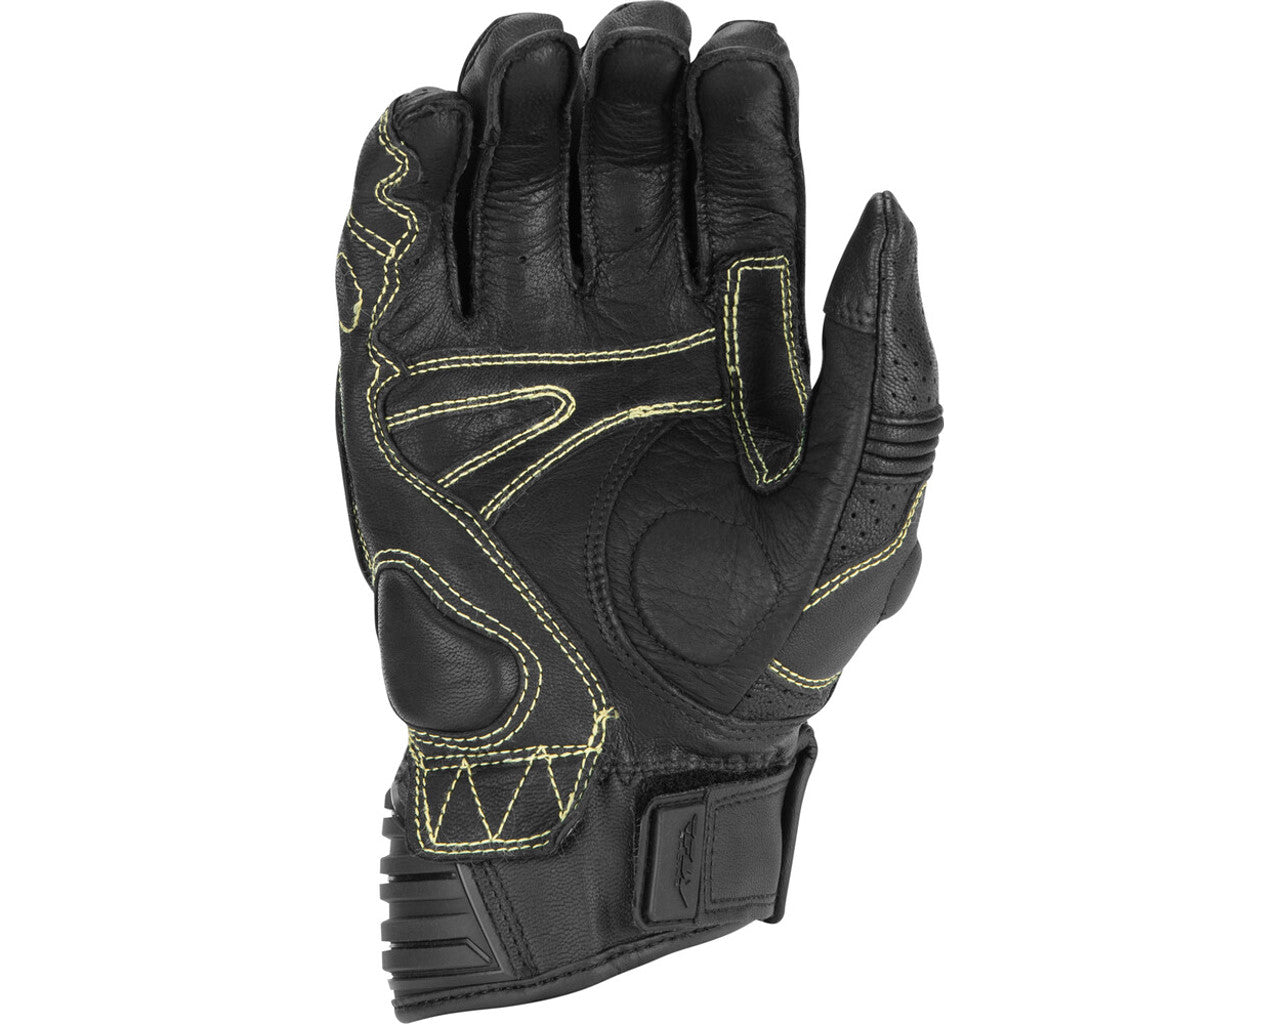 Fly Racing Brawler Leather Motorcycle Gloves Black 